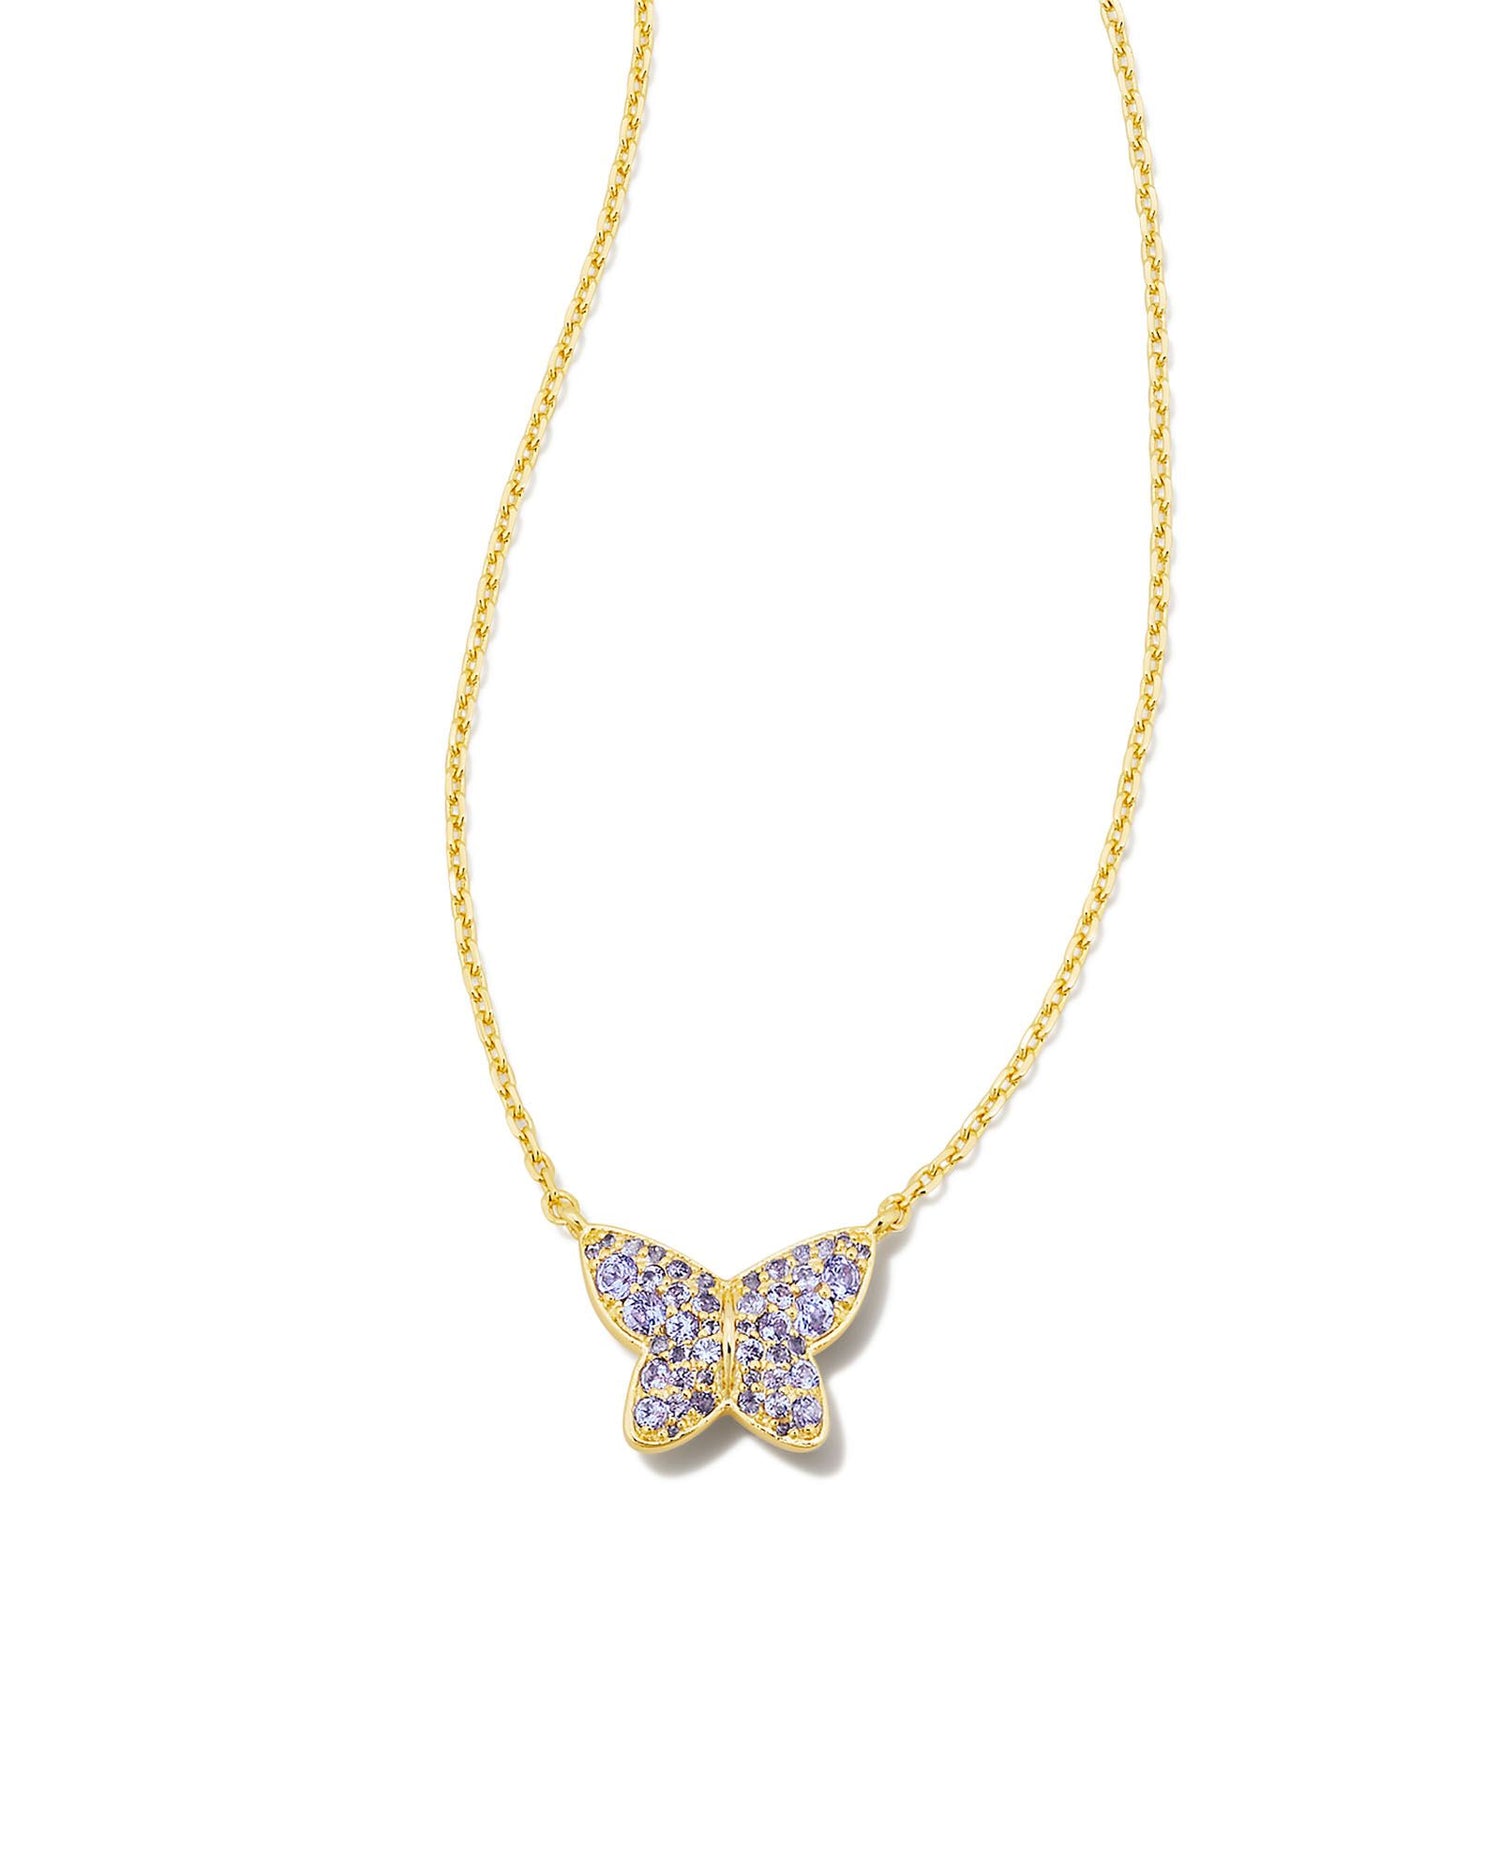 Featuring a meaningful symbol of transformation, growth, and hope, the Lillia Crystal Butterfly Gold Pendant Necklace in Violet Crystal is ready to shake up your necklace stack with its gorgeous sparkle. The metal is 24K Gold Plated Over Brass. 